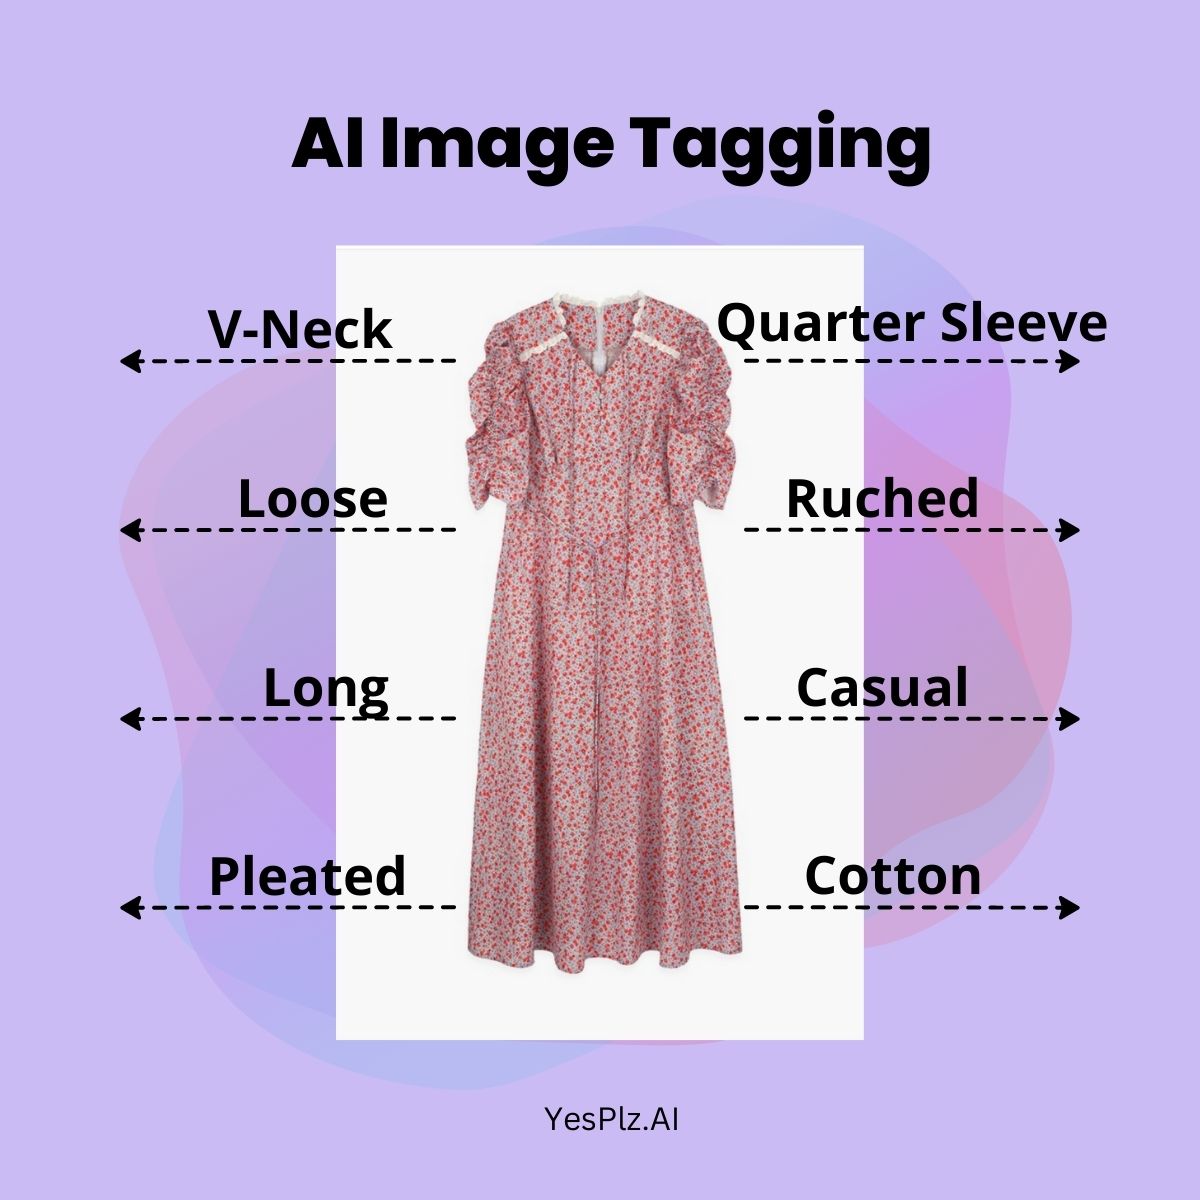 An example of AI image tagging by YesPlz AI using a long dress with tags